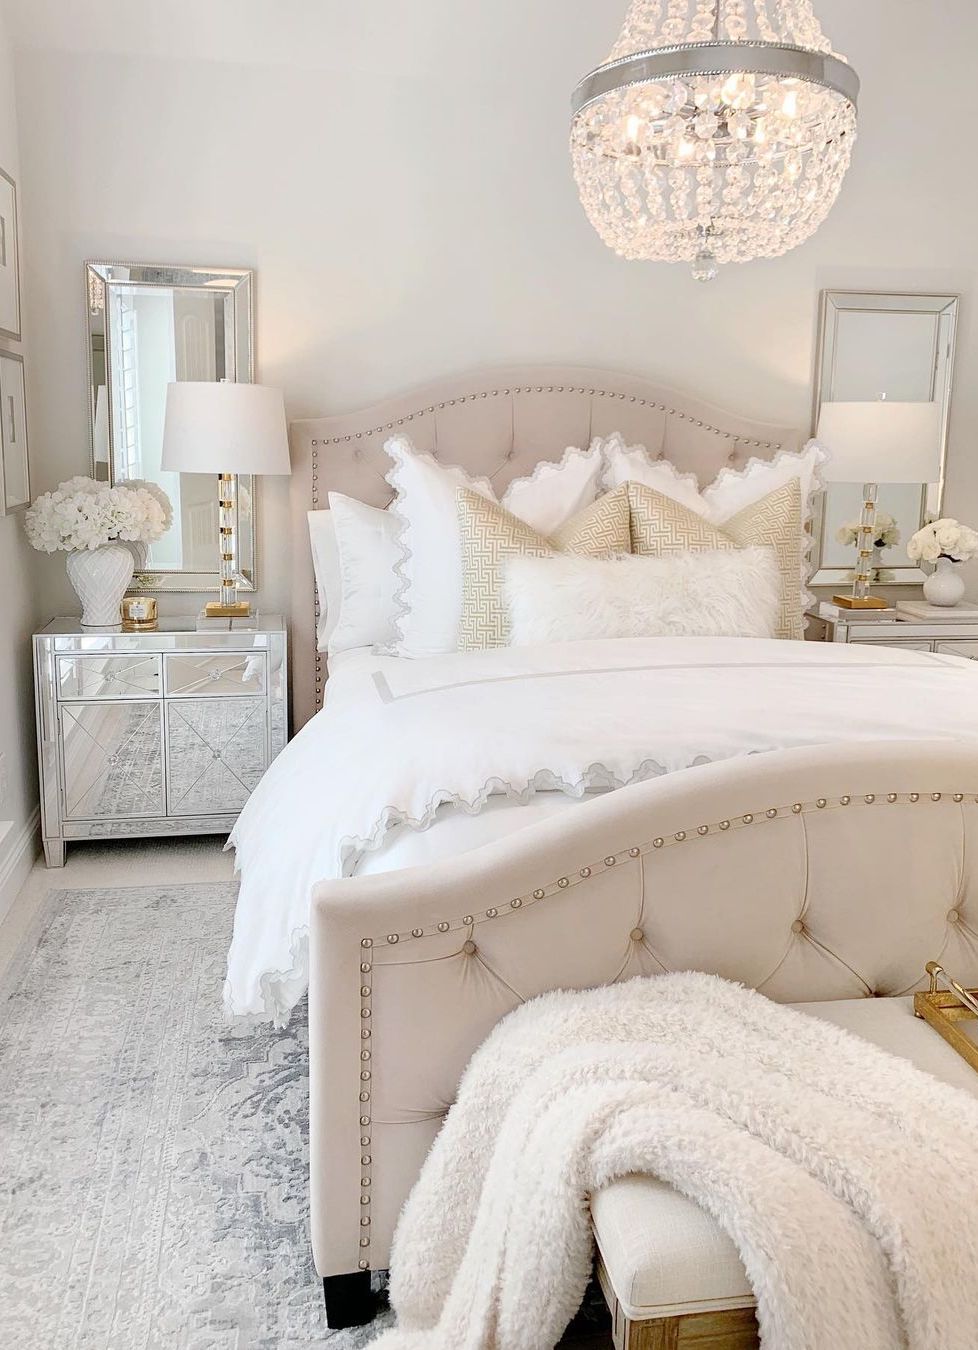 https://curatedinterior.com/wp-content/uploads/2020/10/Glam-Throw-Pillows-on-a-Glam-Bed-with-Tufted-Headboard-via-@thedecordiet.jpg